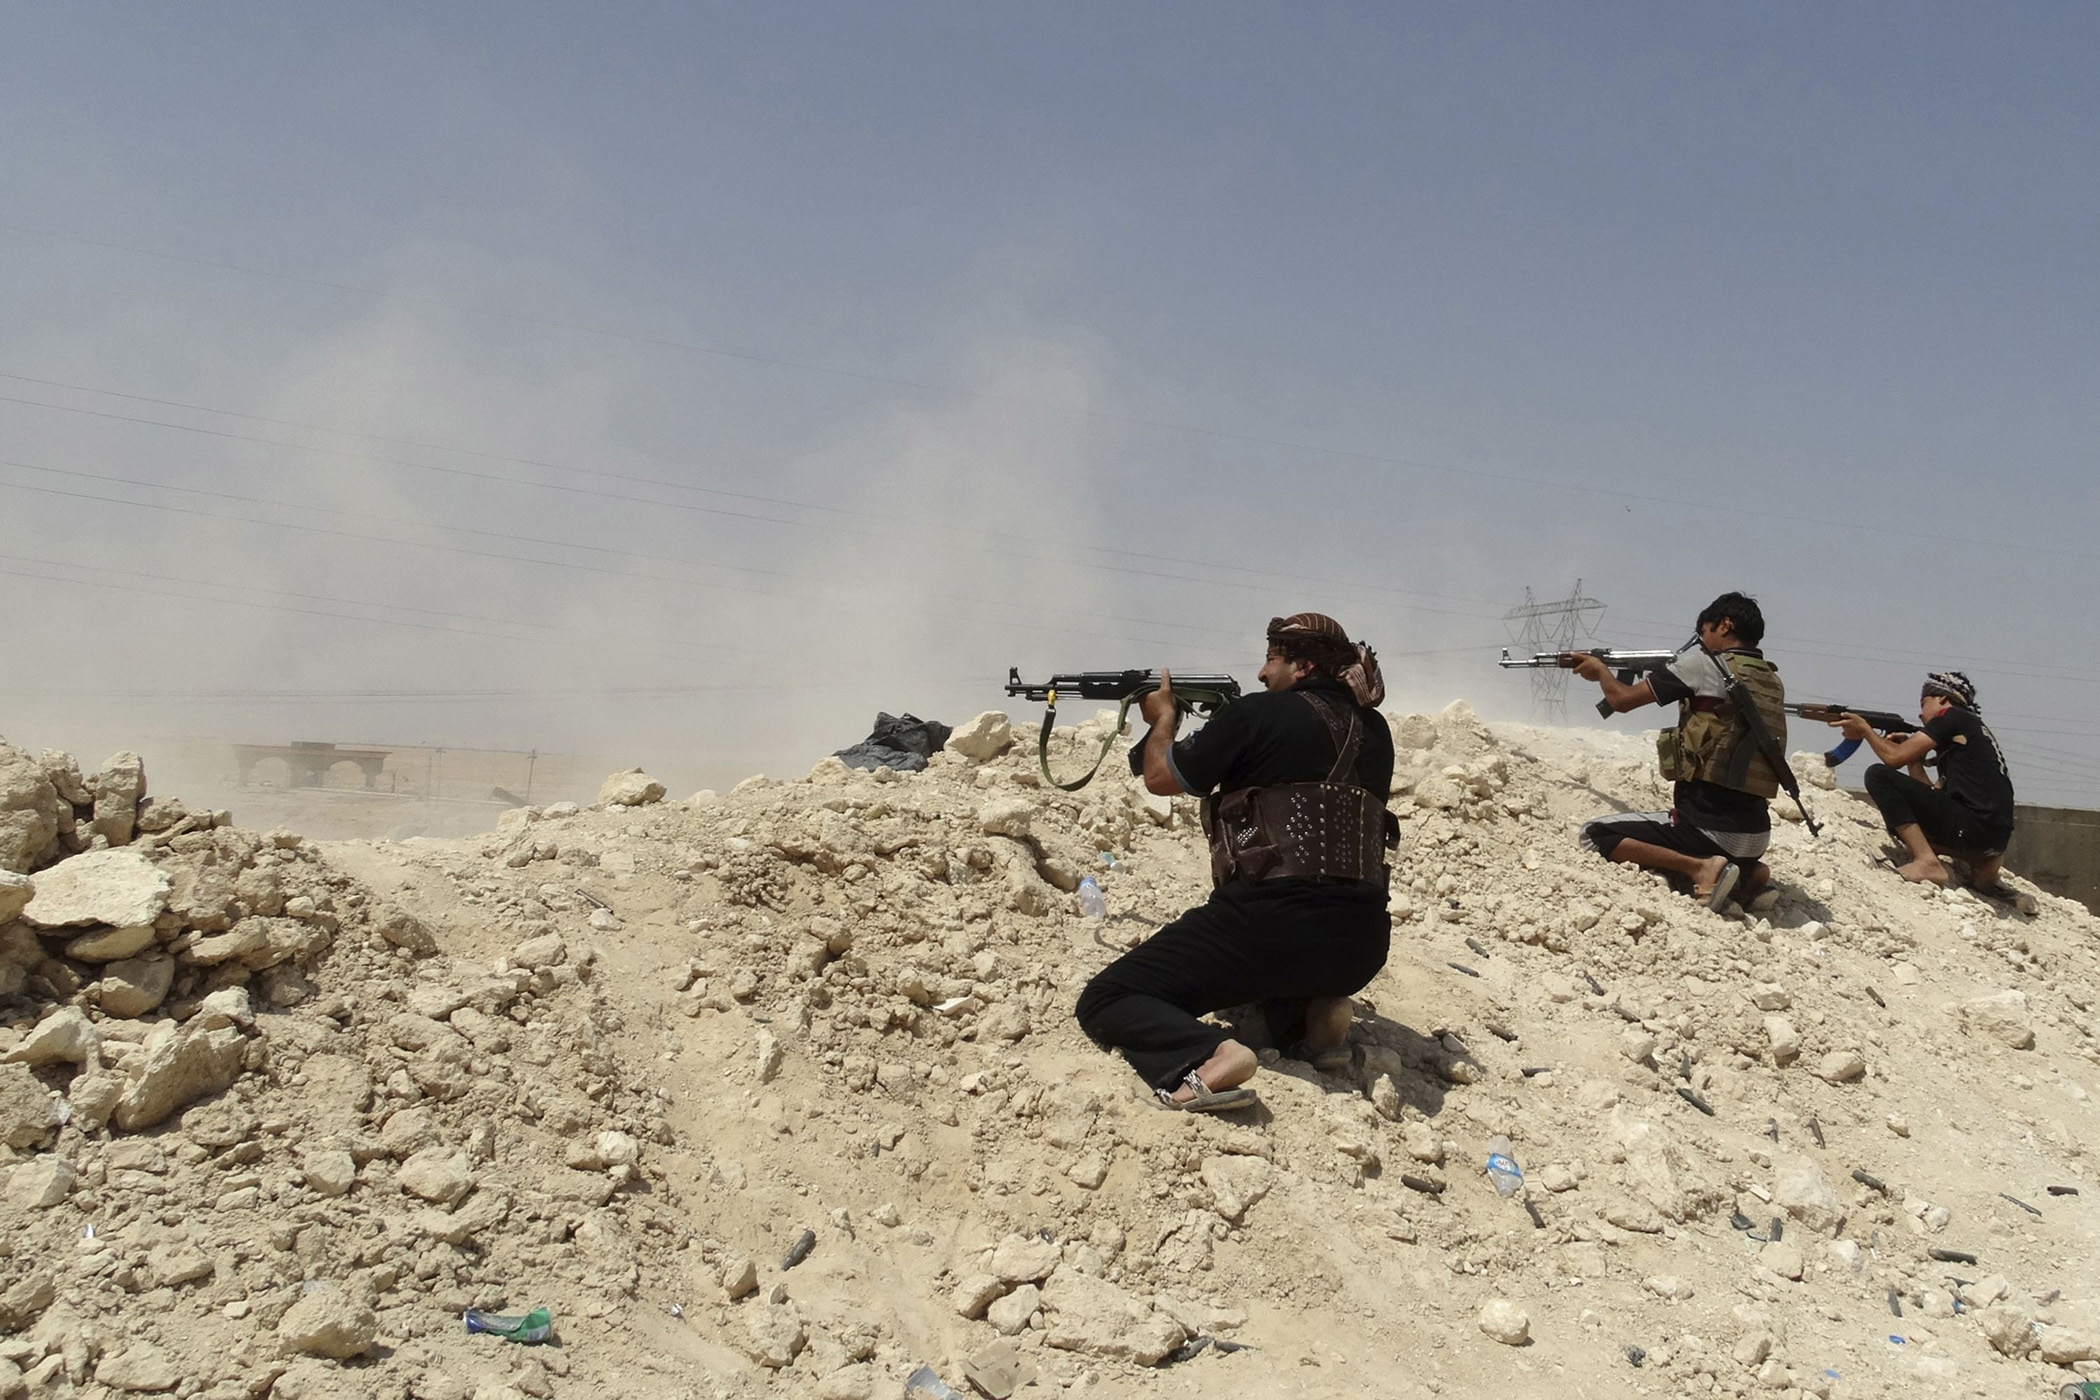 Tribal fighters seen during a battle with ISIS militants, in Haditha, Iraq, Aug. 25, 2014.